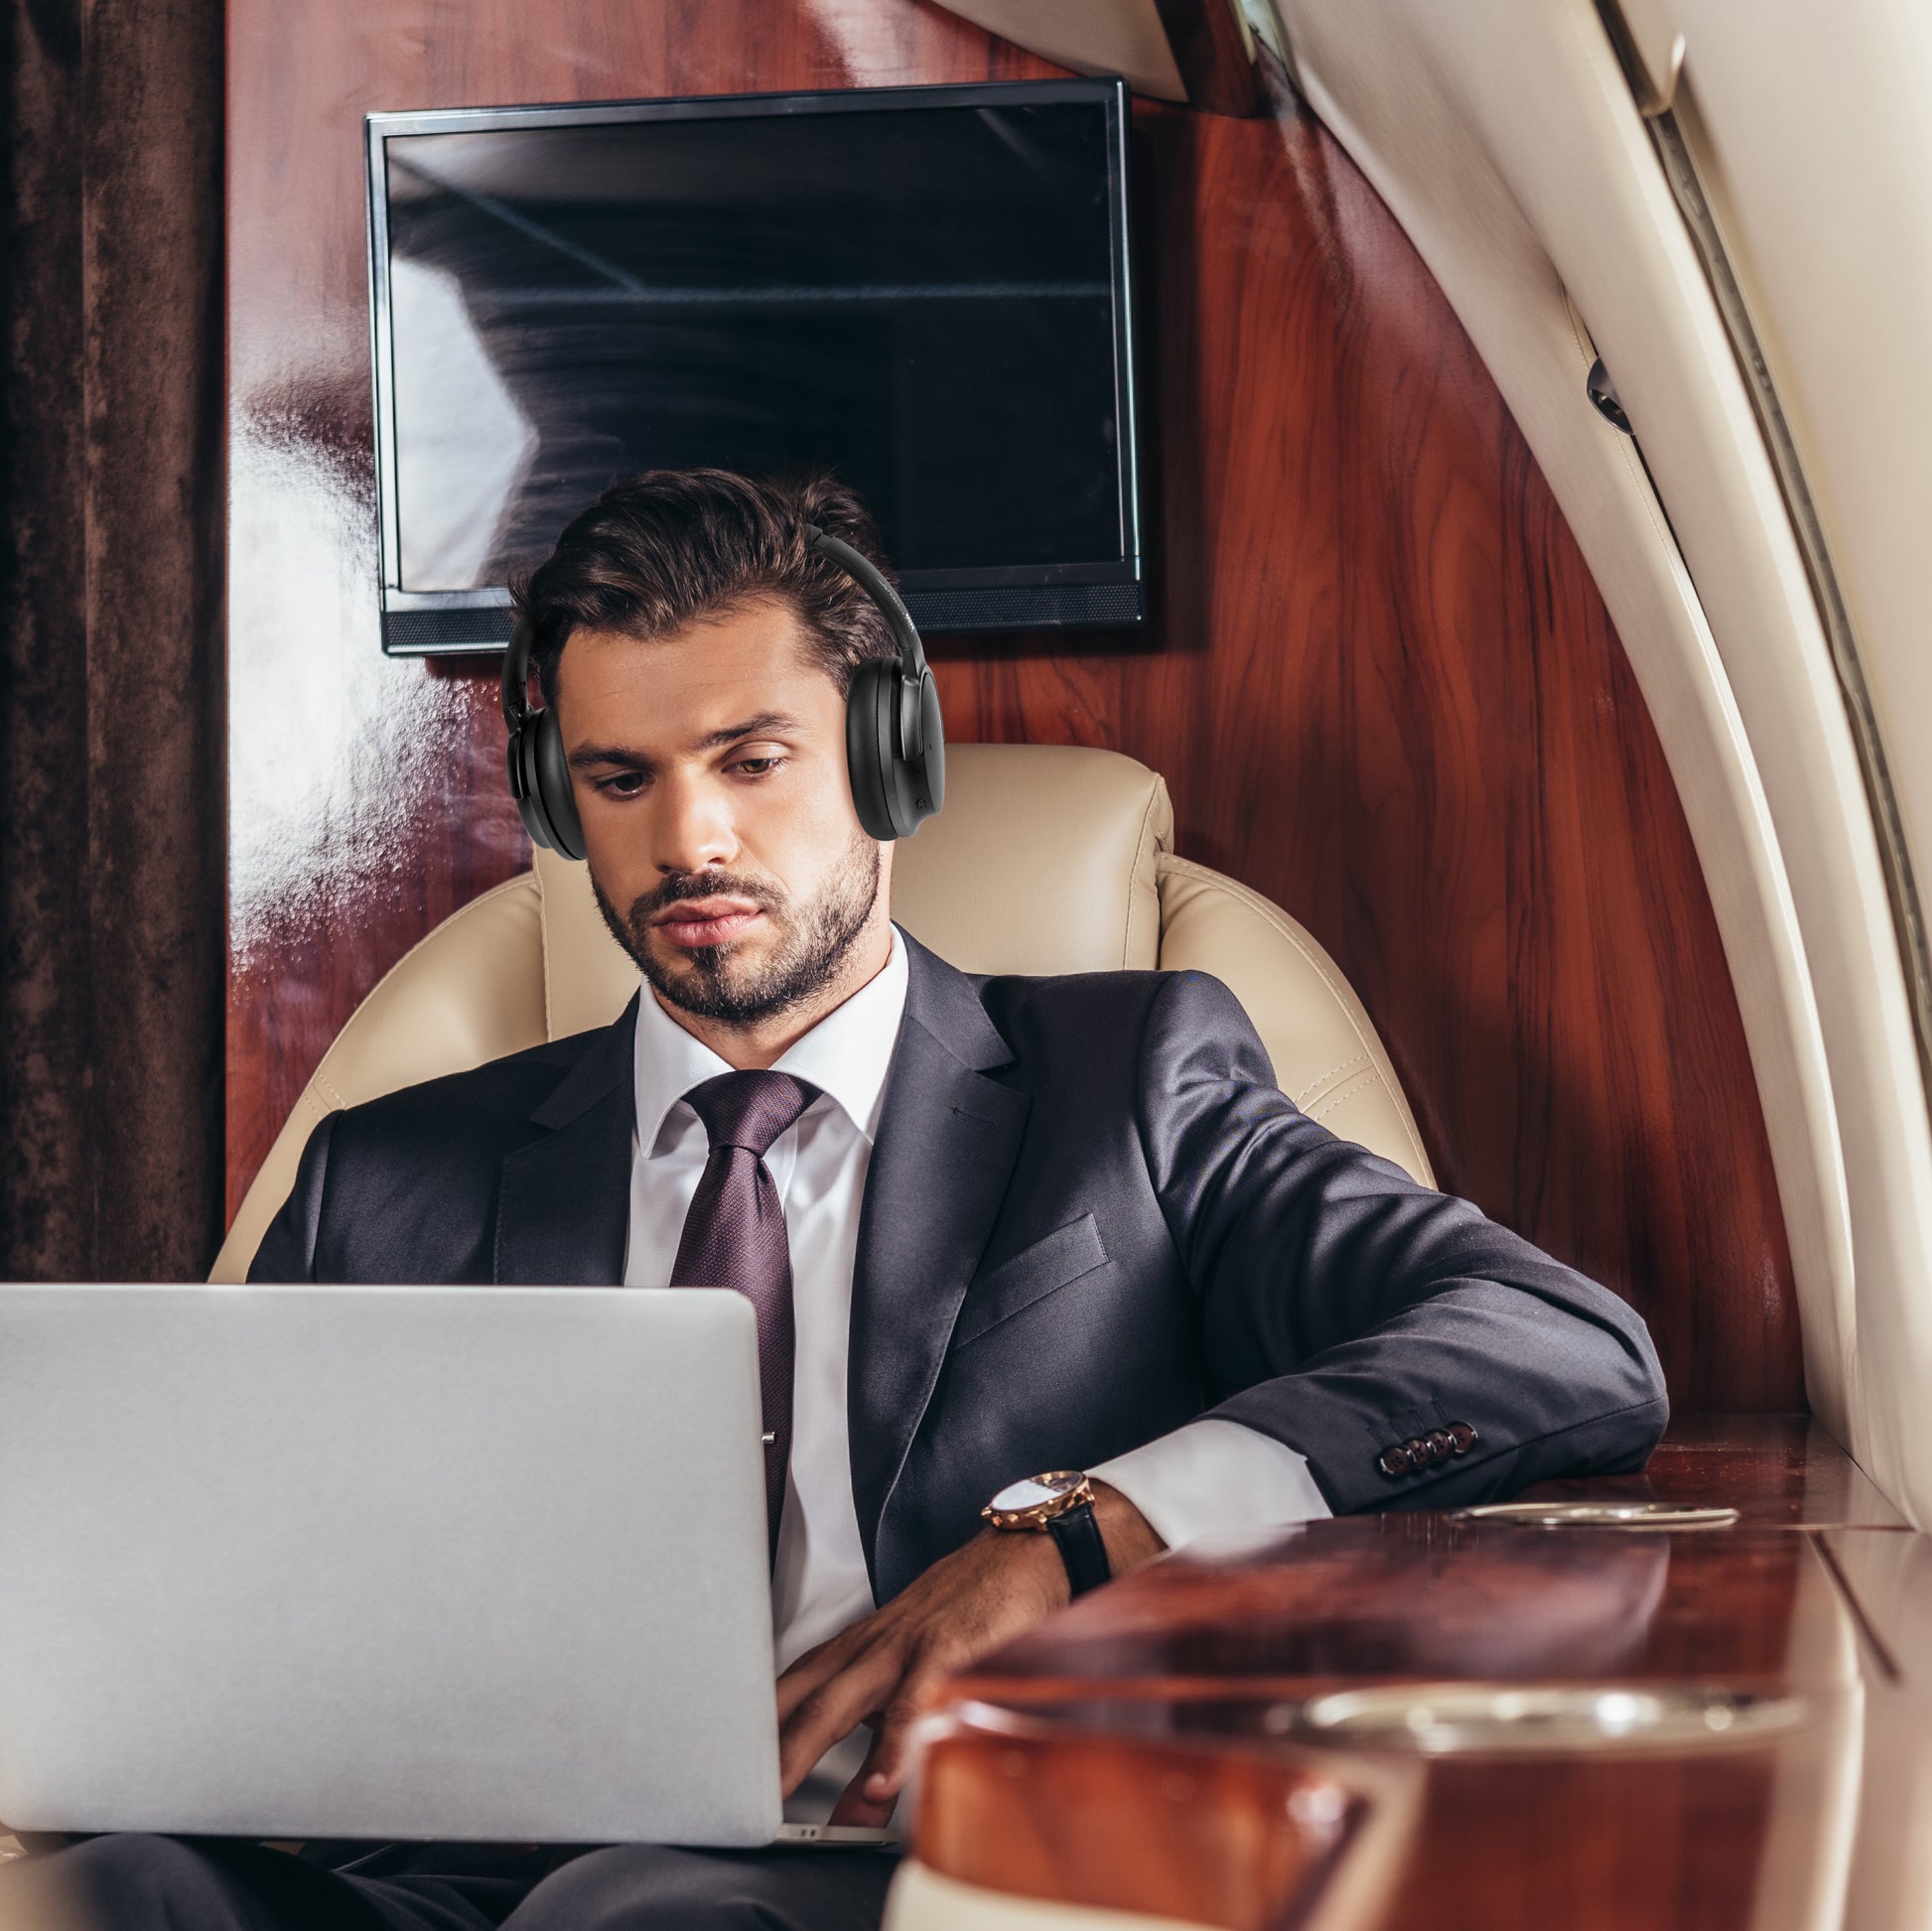 Photo of Morpheus 360 Krave HD Wireless Headphones of a white business man using the Krave HD Wireless Headphones working on his computer while on a business trip.